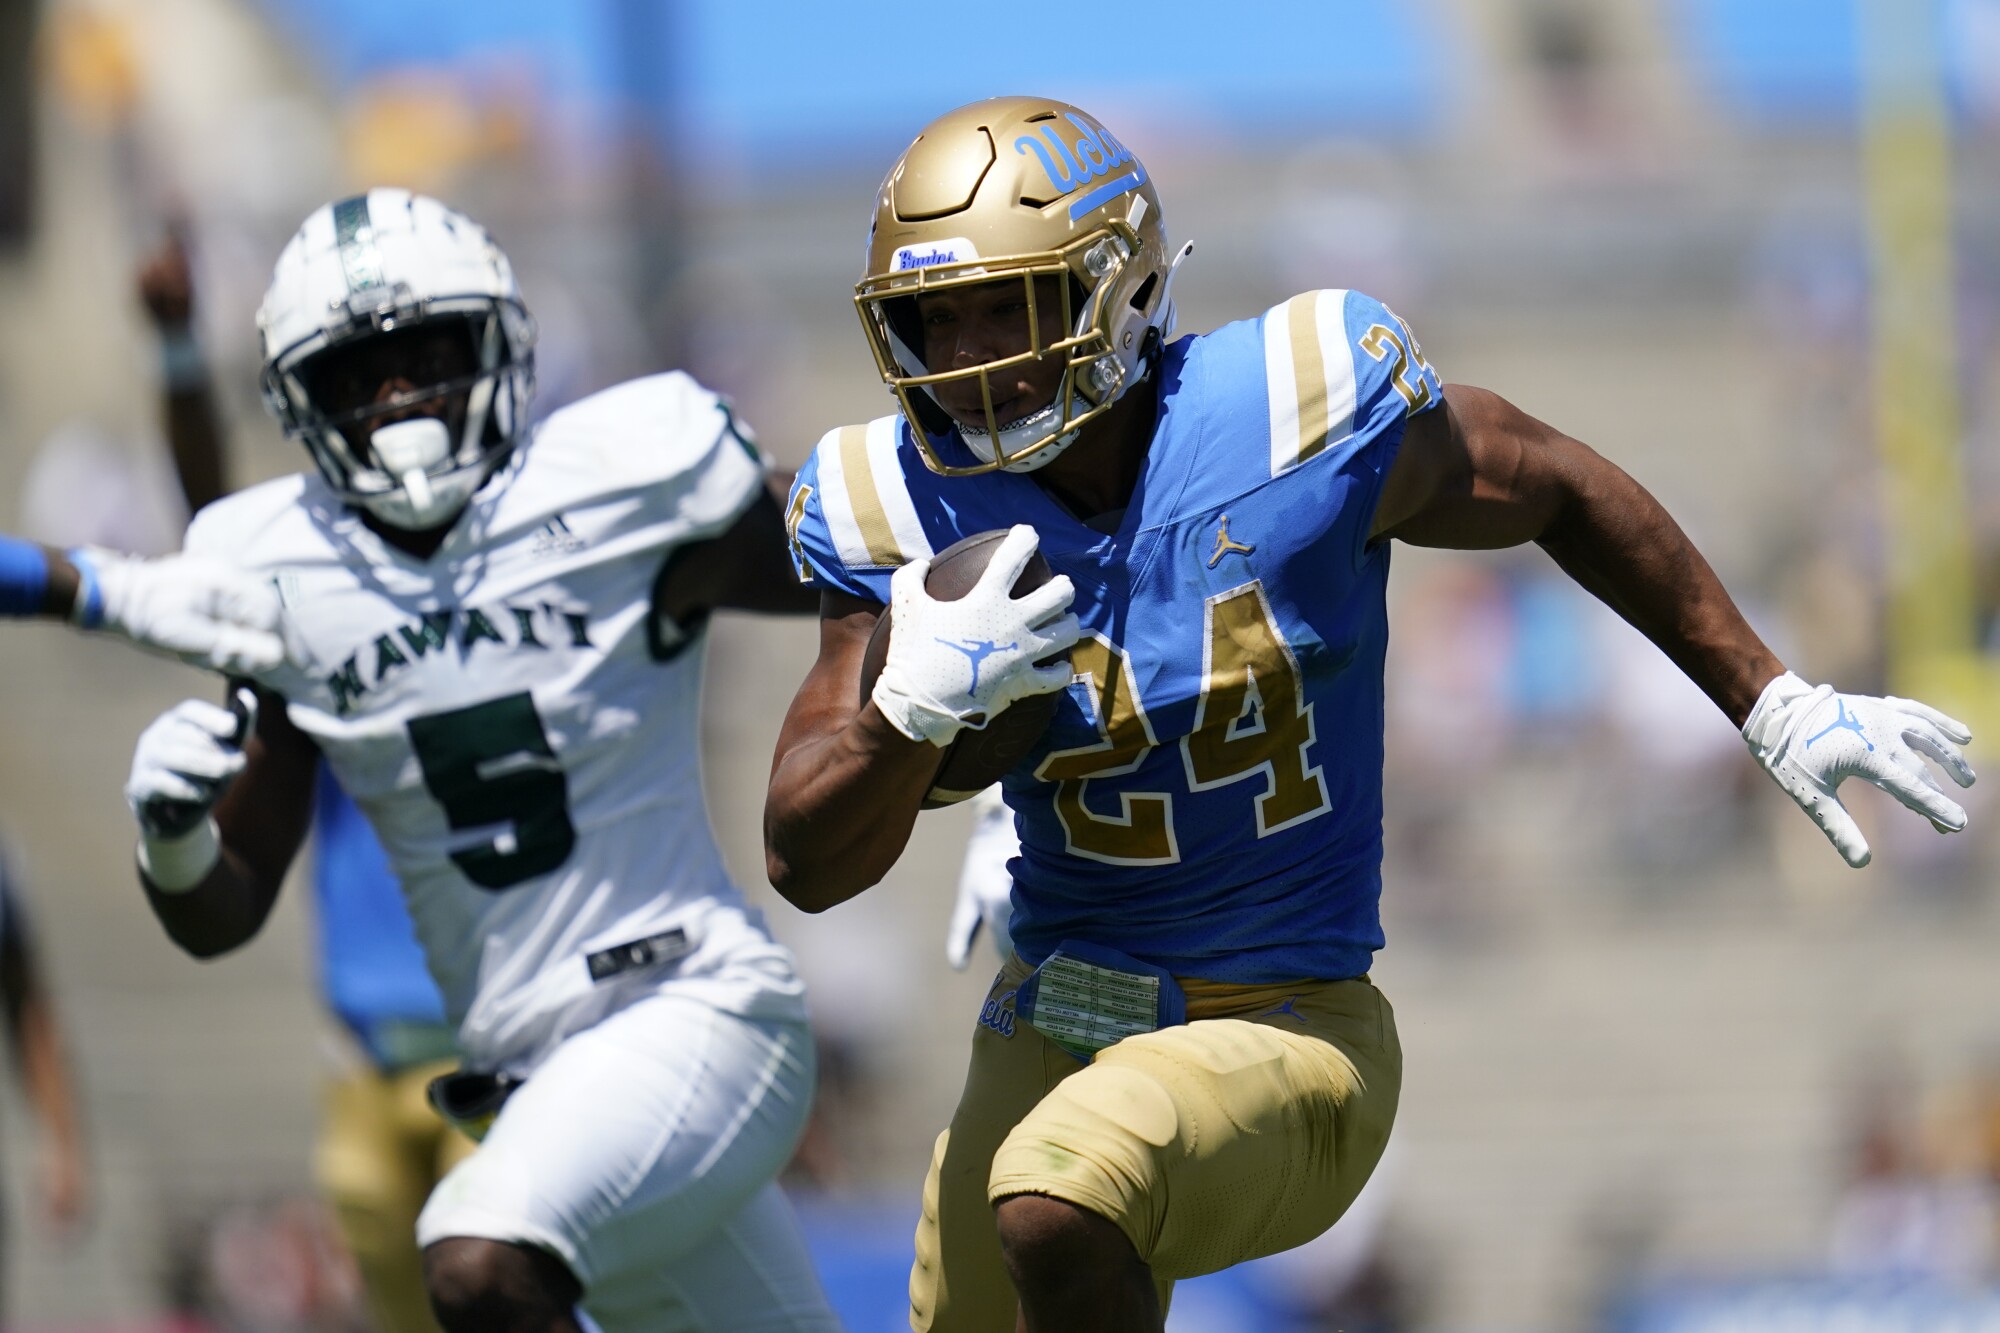 UCLA's Zach Charbonnet runs for a touchdown Aug. 28, 2021, at the Rose Bowl.